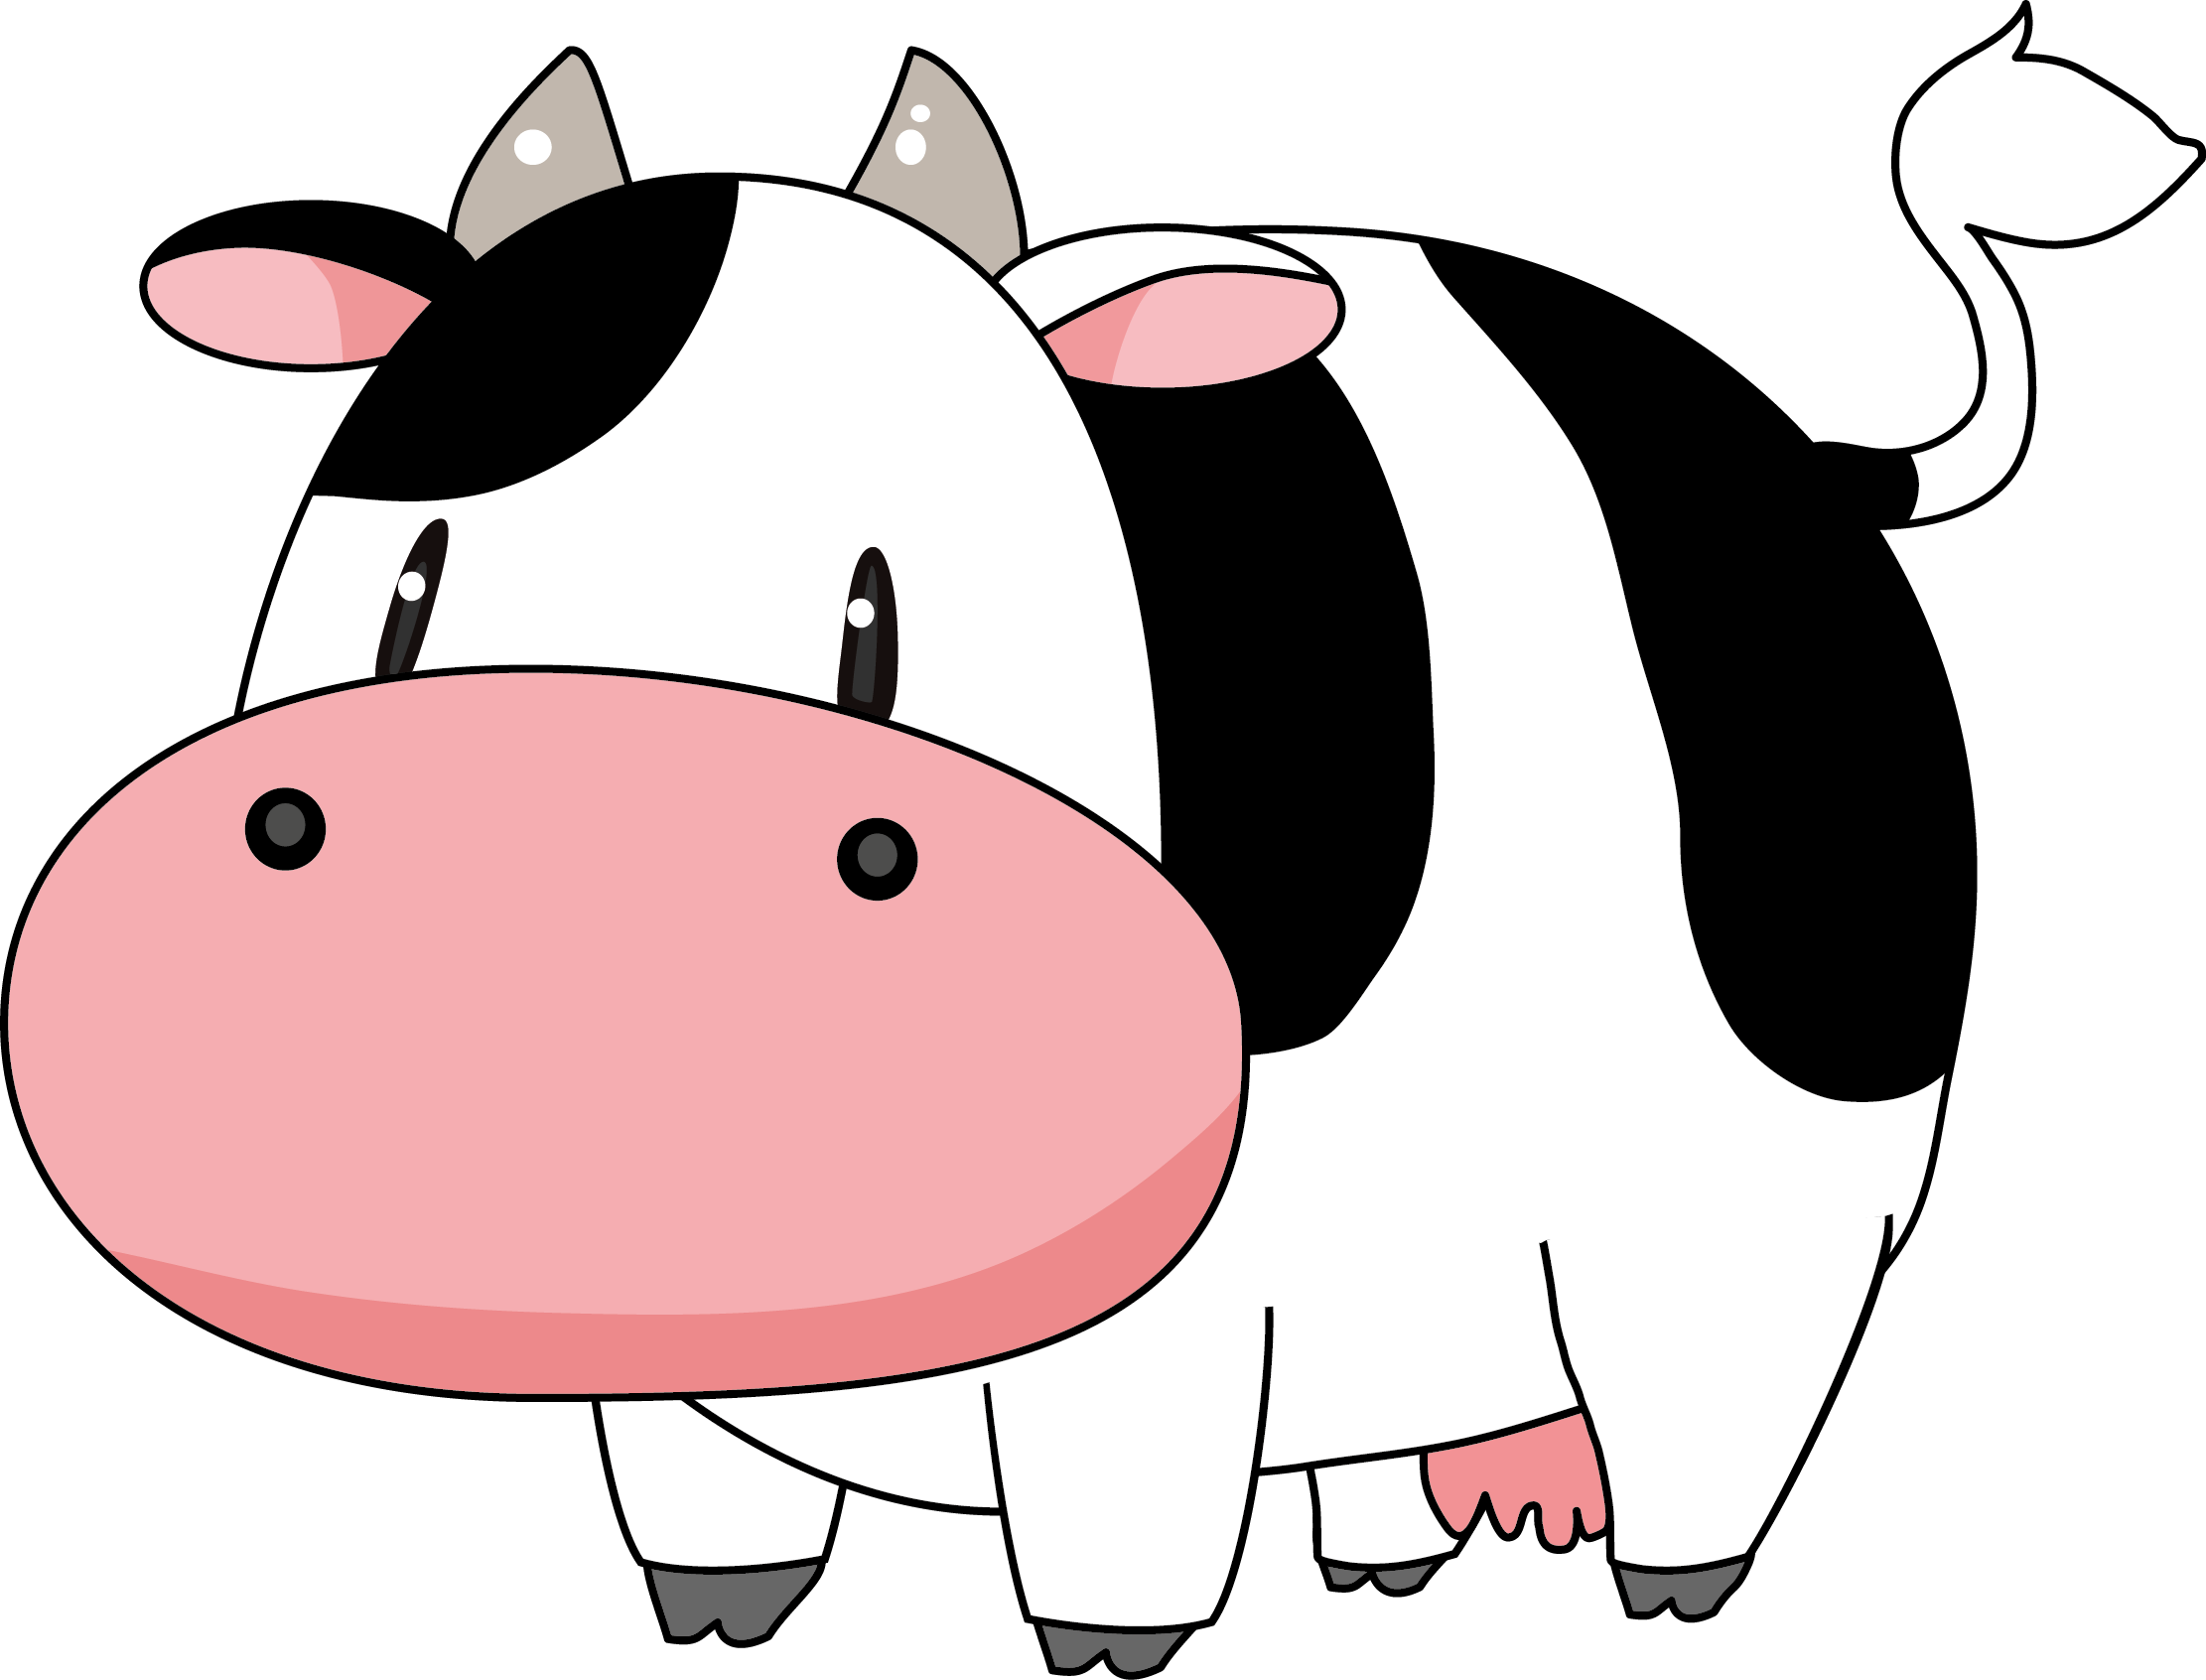 Games Project - Harvest Moon Cow Png (2222x1692)